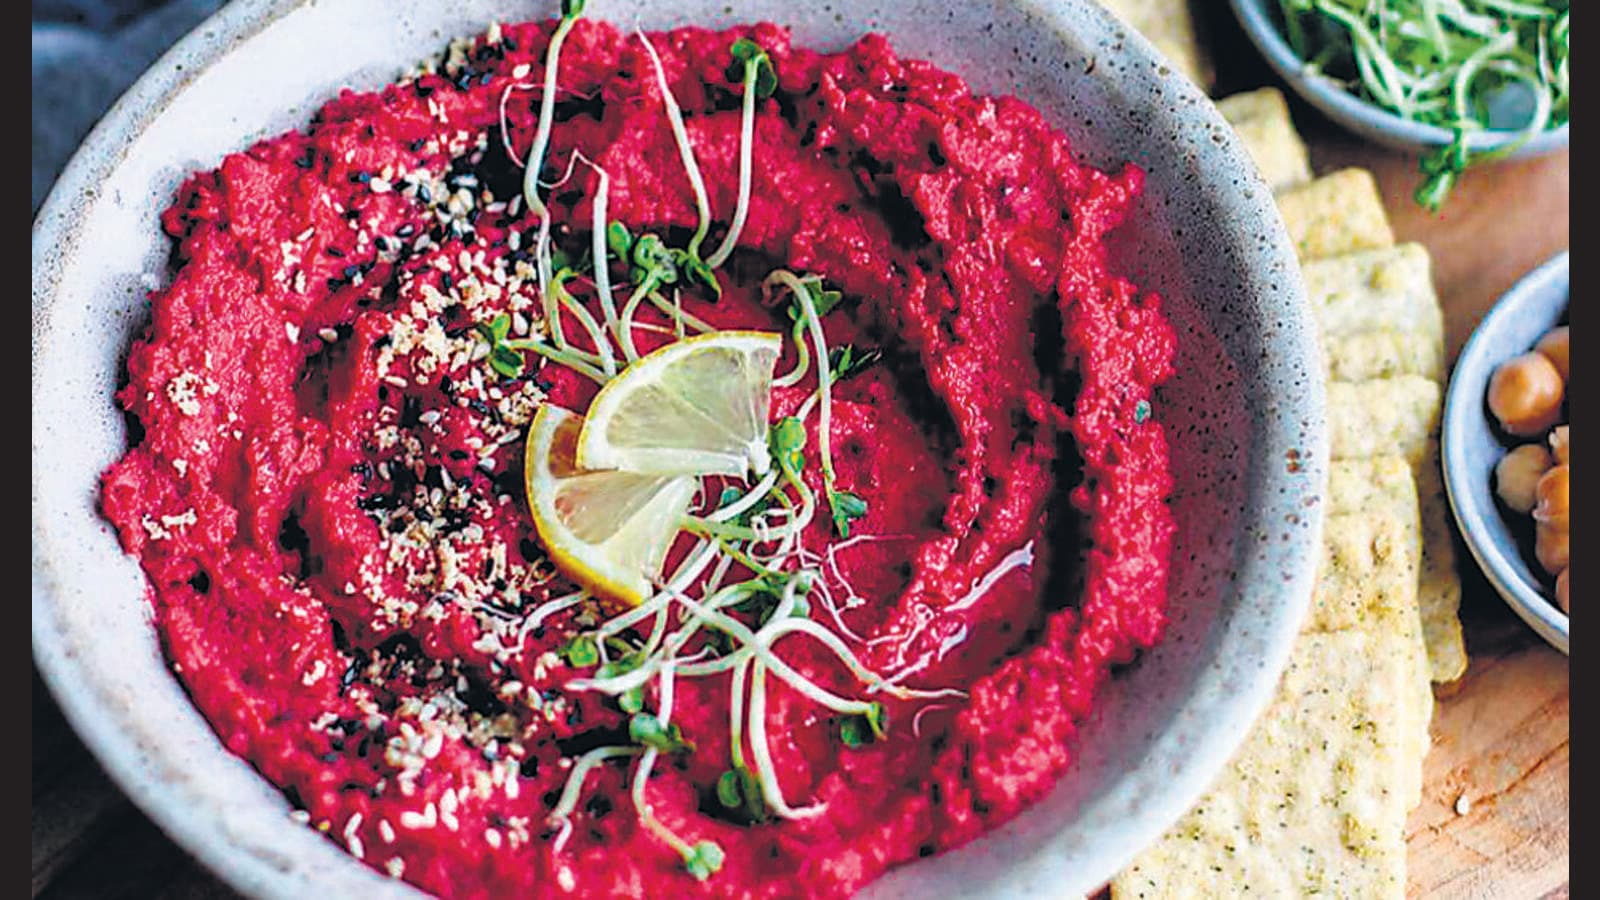 Hummus: A blend of health and flavours